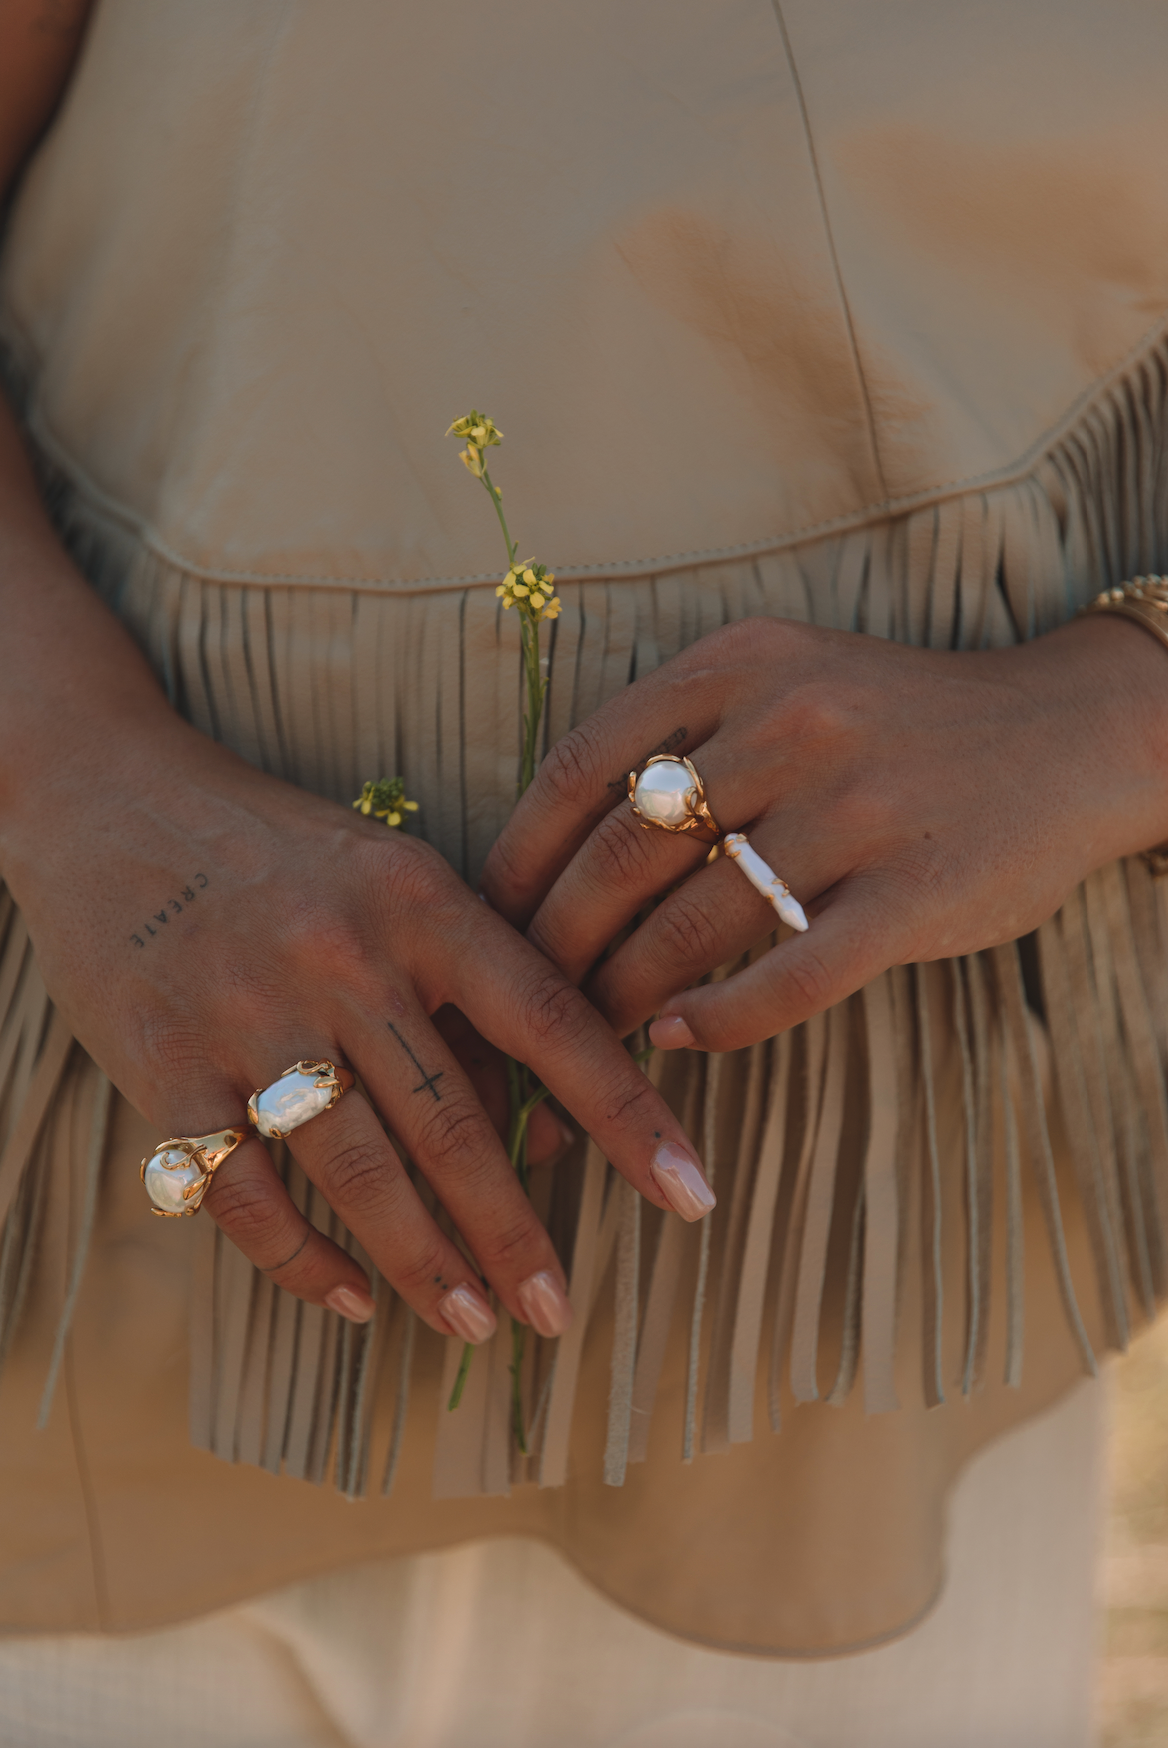 The Willa Pearl Ring